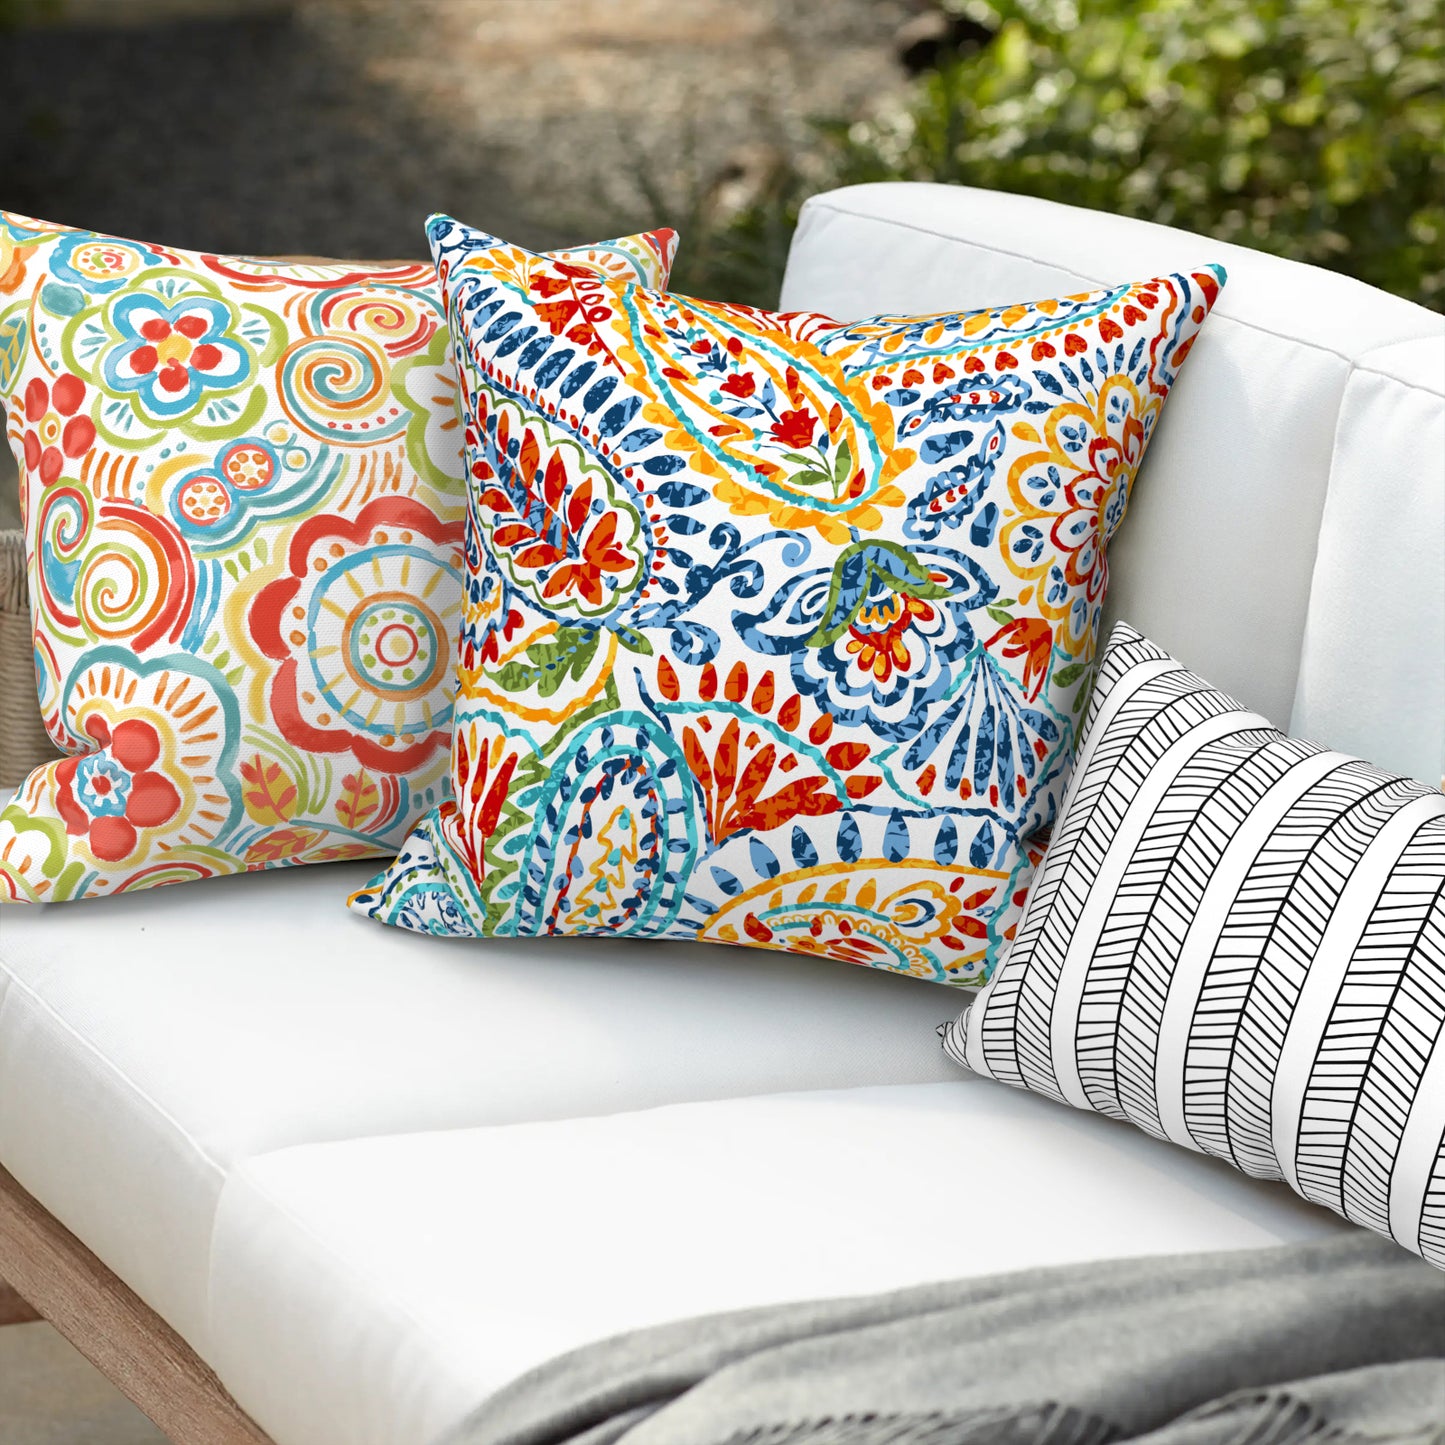 Melody Elephant Pack of 2 Patio Throw Pillow Covers ONLY, Water Repellent Cushion Cases 20x20 Inch, Square Pillowcases for Outdoor Couch Decoration, Paisley Multi